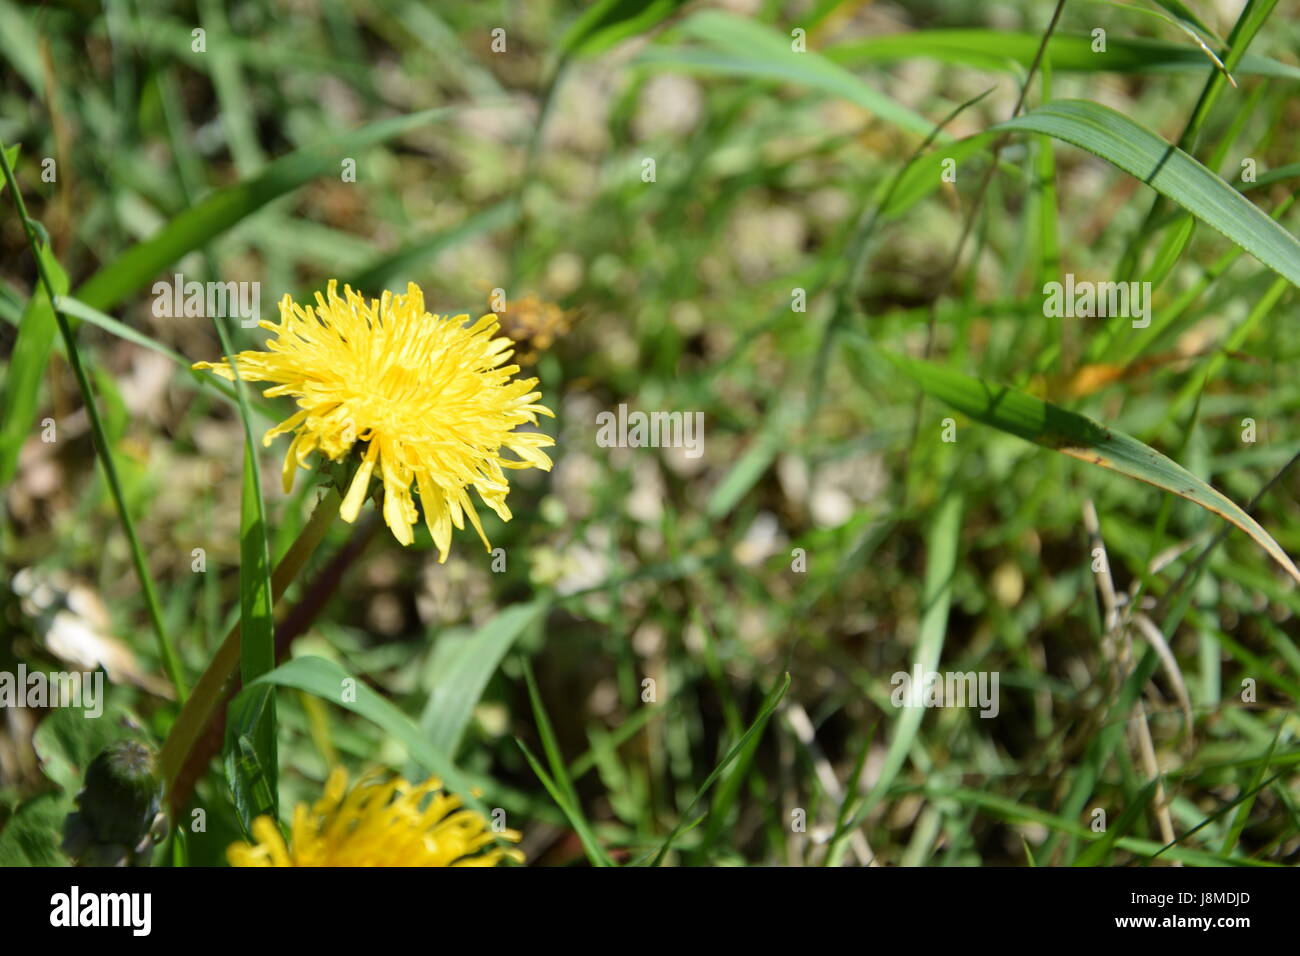 Flower of the common dandelion (Taraxacum officinale), in full bloom in the grass Stock Photo